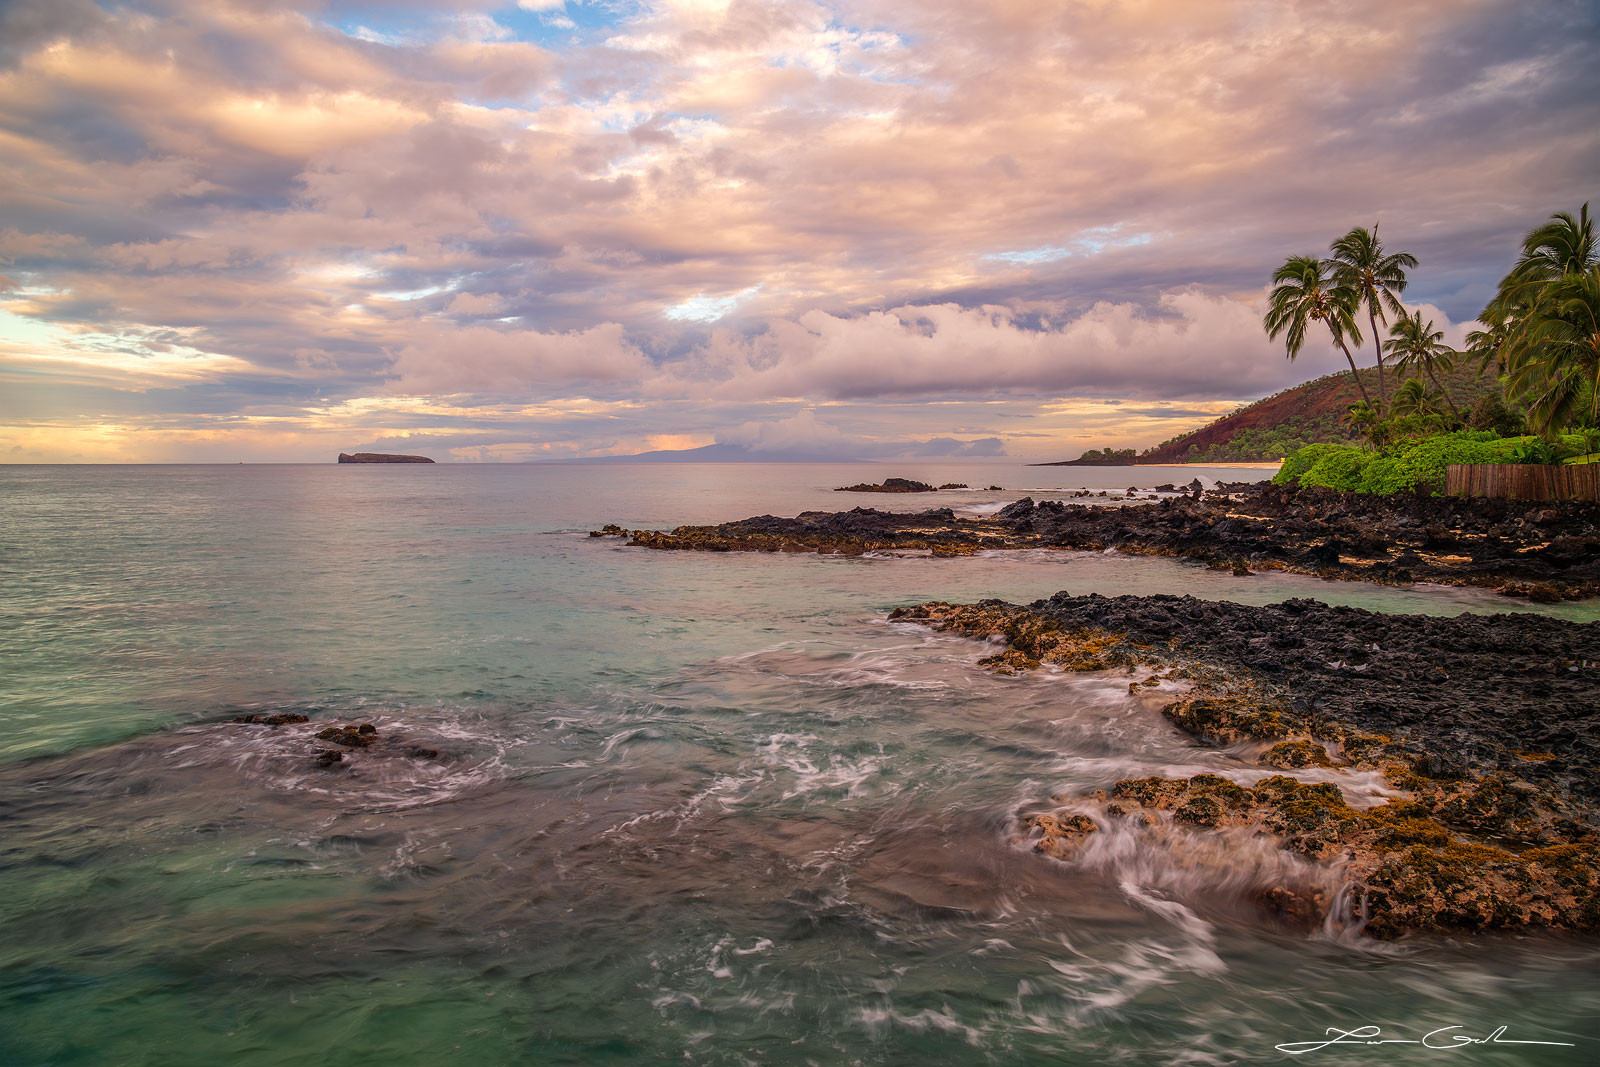 Sunrise over Maui coastline featuring soft, silken ocean waves against a volcanic shore, green and turquoise water, distant view of Molokini Island under light orange-hued morning clouds - Gintchin Fine Art.